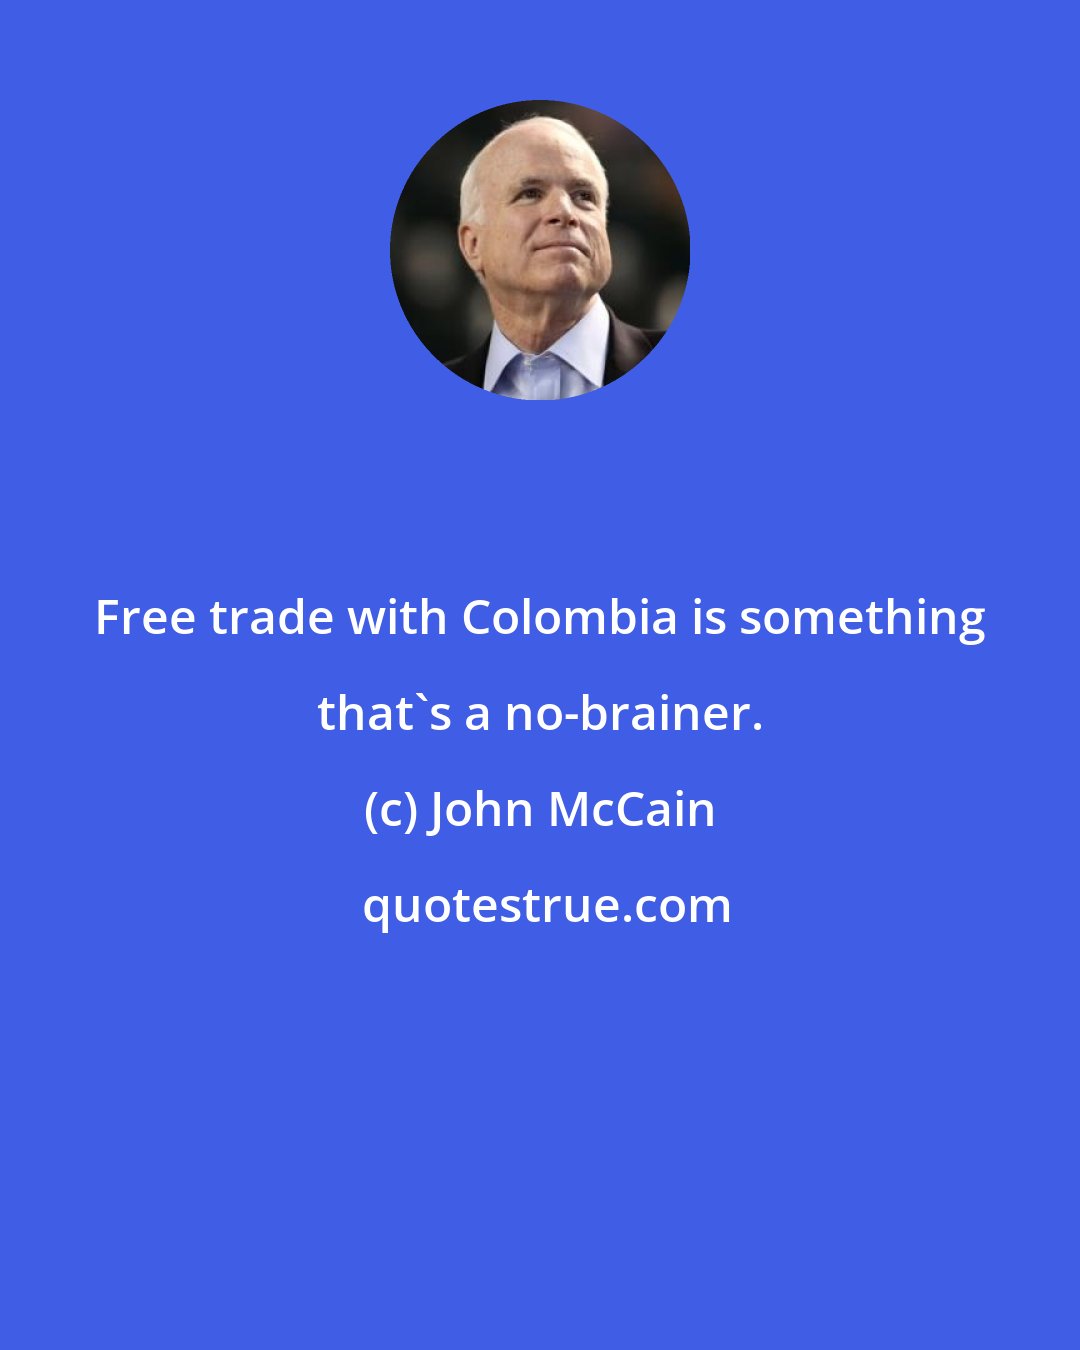 John McCain: Free trade with Colombia is something that's a no-brainer.